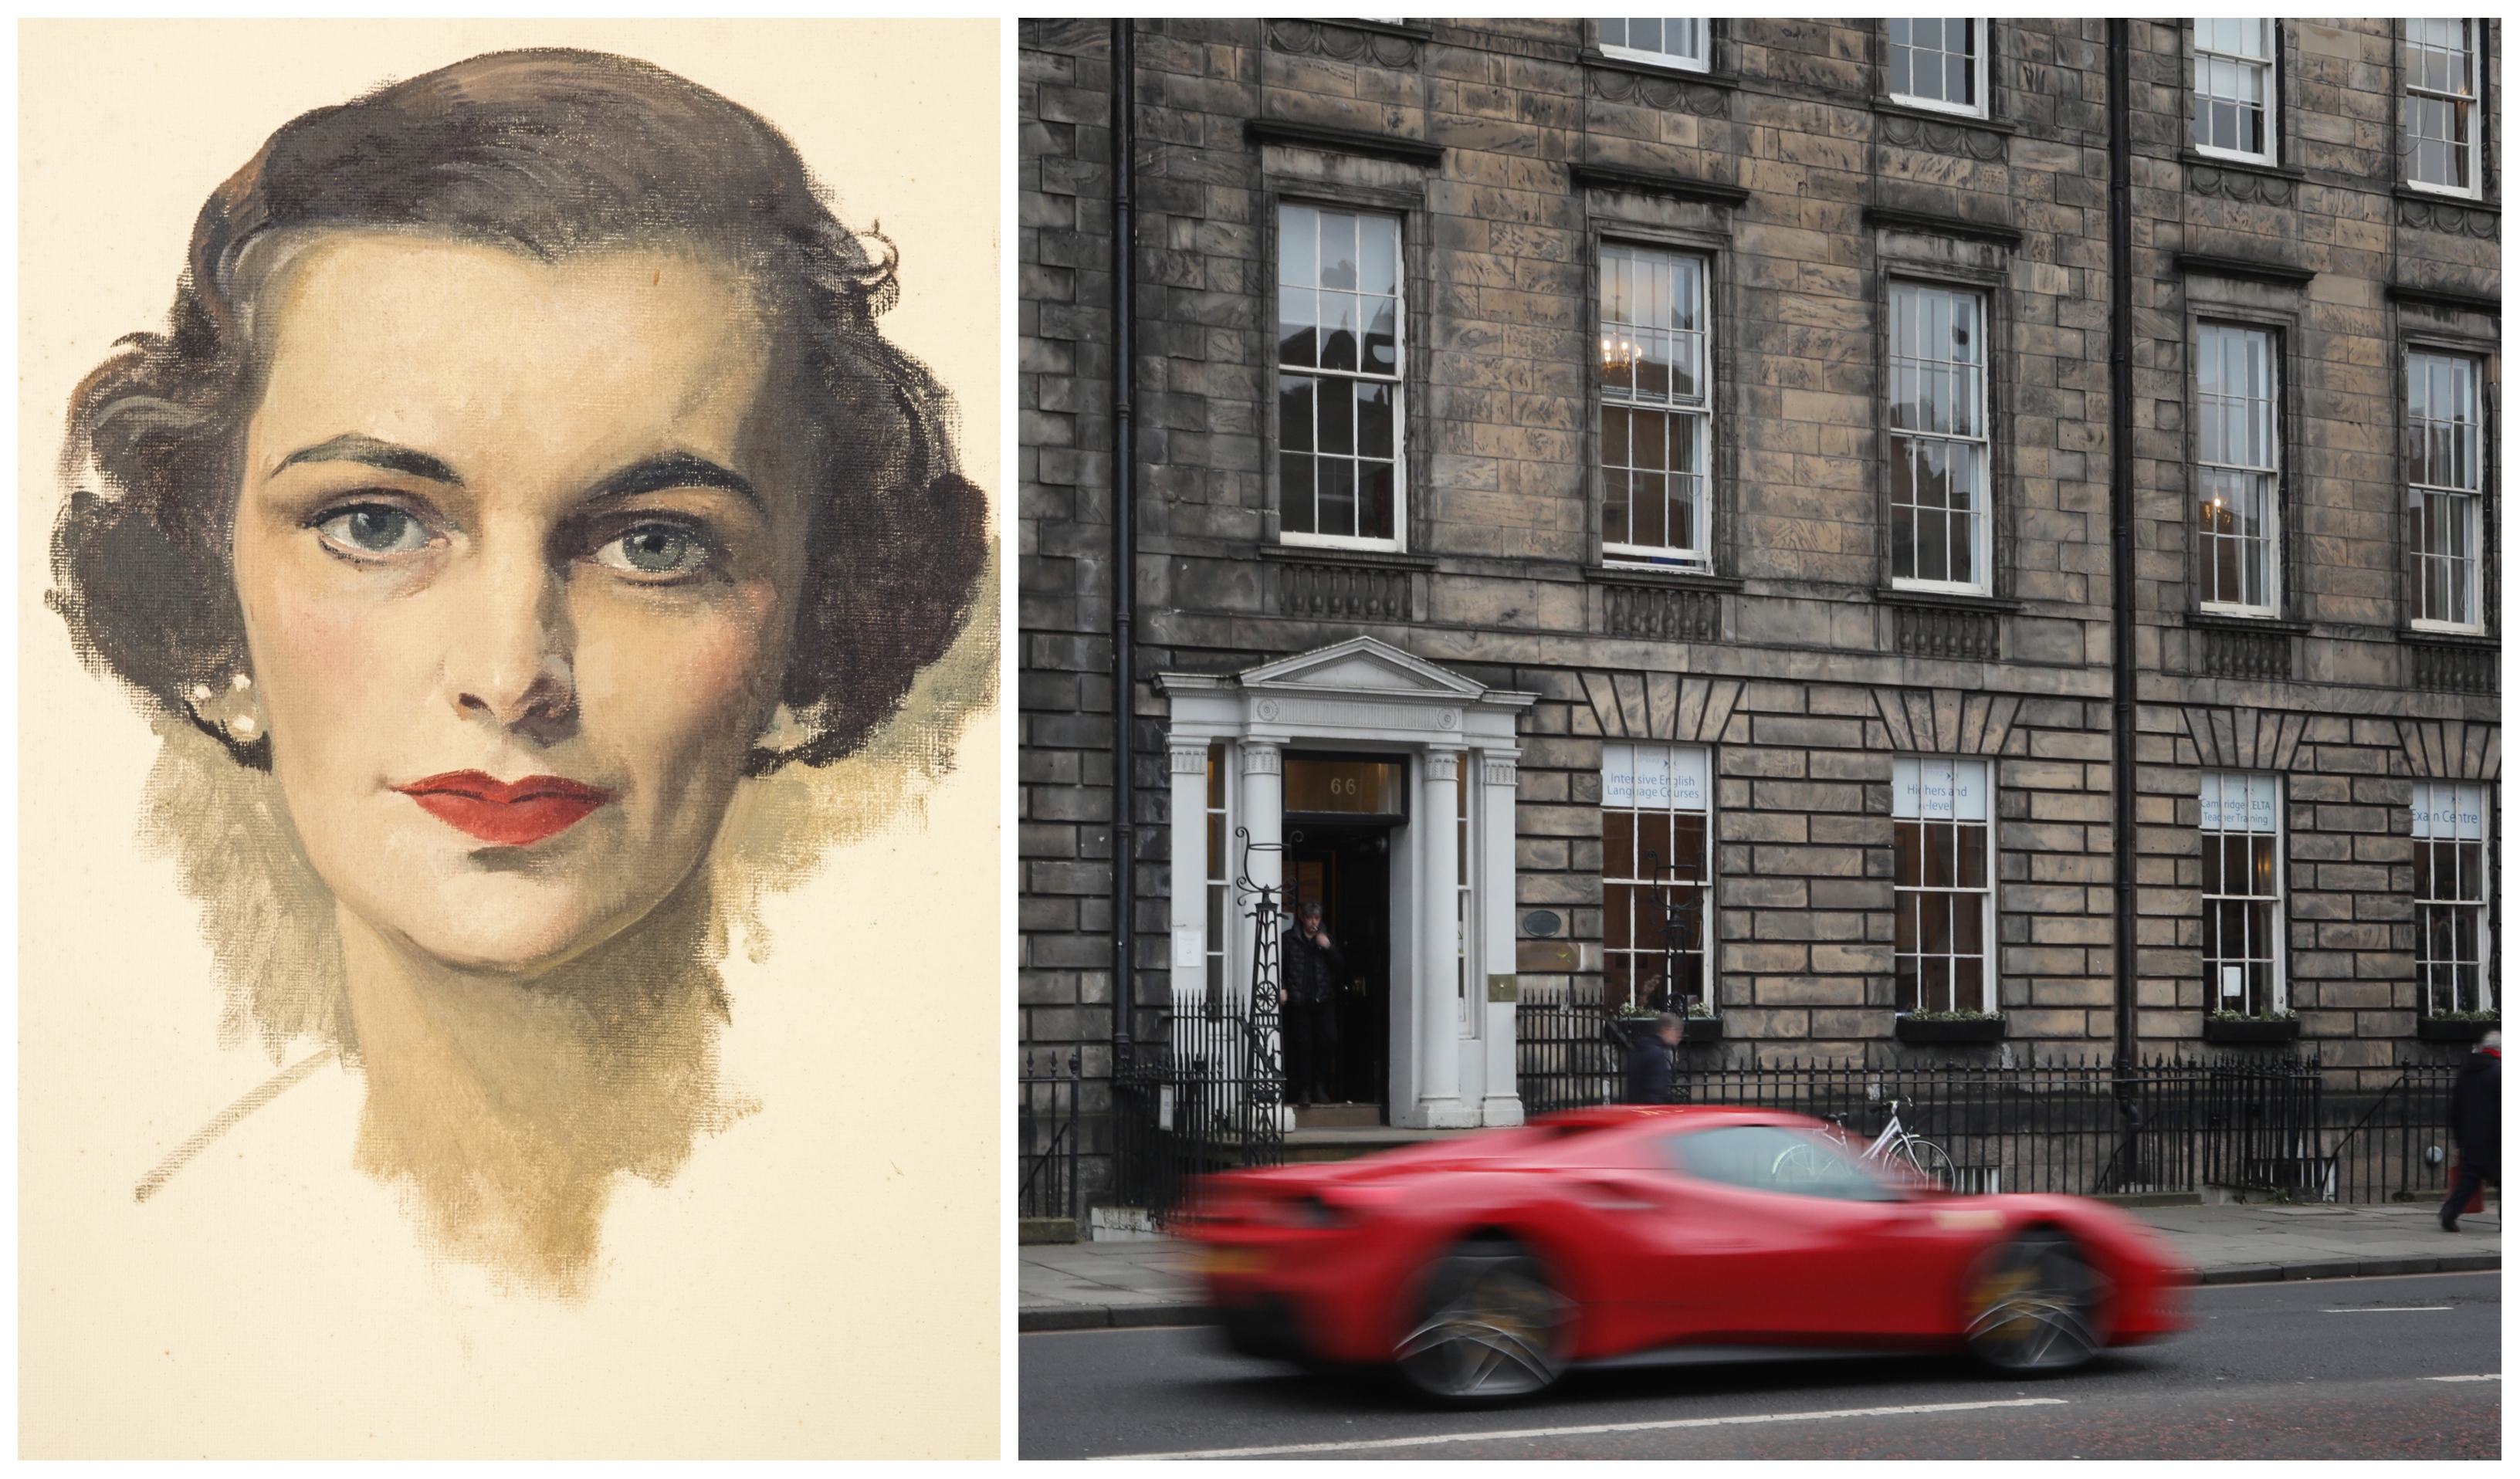 An oil sketch of Margaret, Duchess of Argyll by Sir Herbert James Gunn. She was one of the characters connected to 66 Queen Street, house of secrets in Edinburgh’s New Town